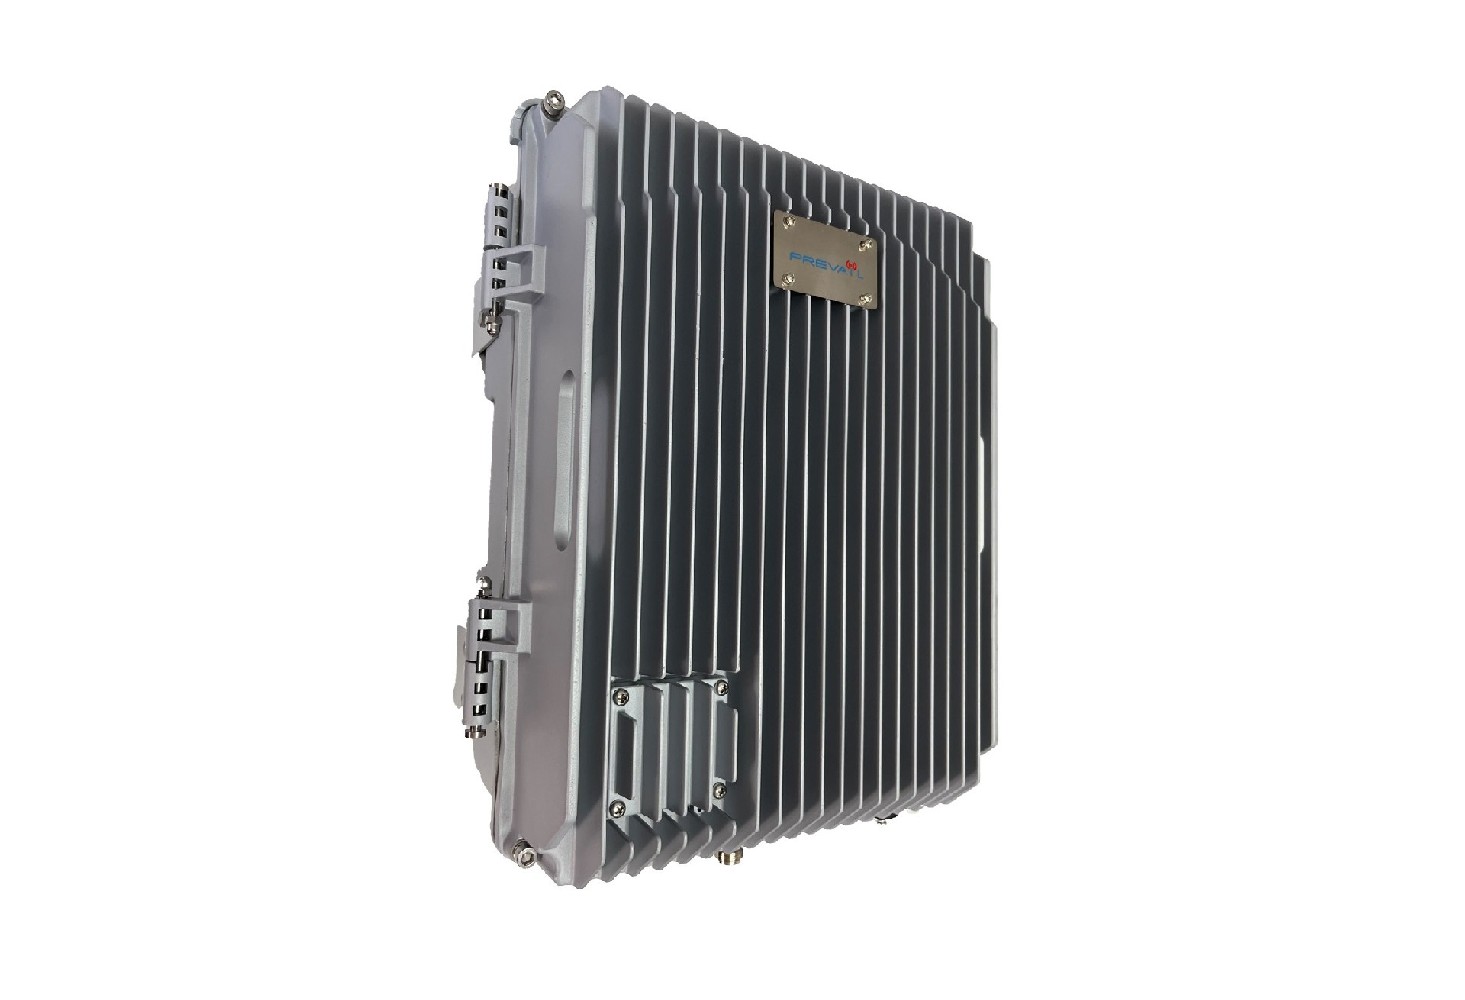 GSM High Power ICS Repeater